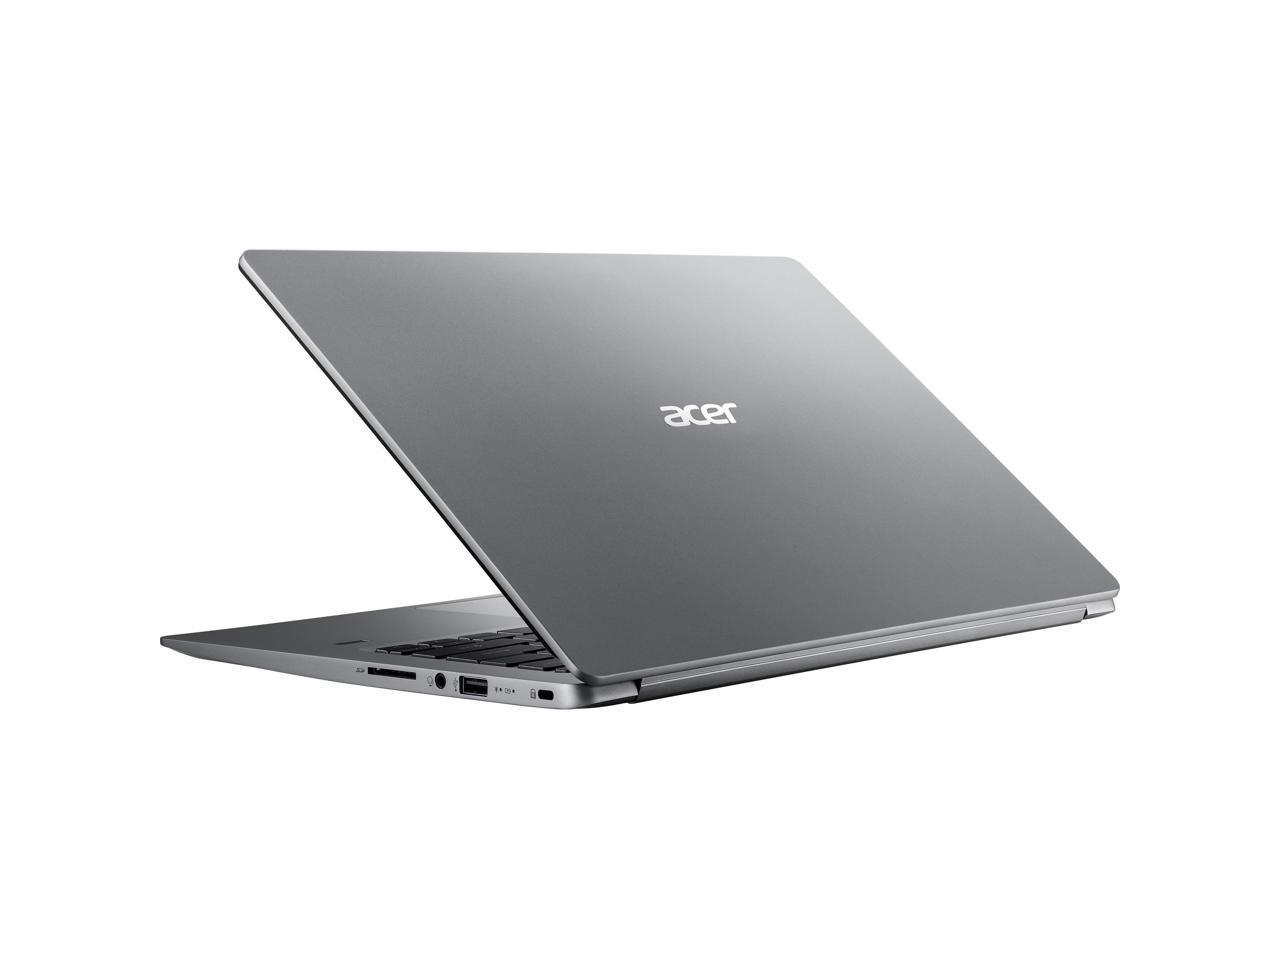 Acer Swift 1 SF114-32-P85N 14" LCD Notebook - Intel Pentium Silver N5000 Quad-core (4 Core) 1.10 GHz - 4 GB DDR4 SDRAM - 128 GB SSD - Windows 10 Home in S mode 64-bit - 1920 x 1080 - In-plane Switchin